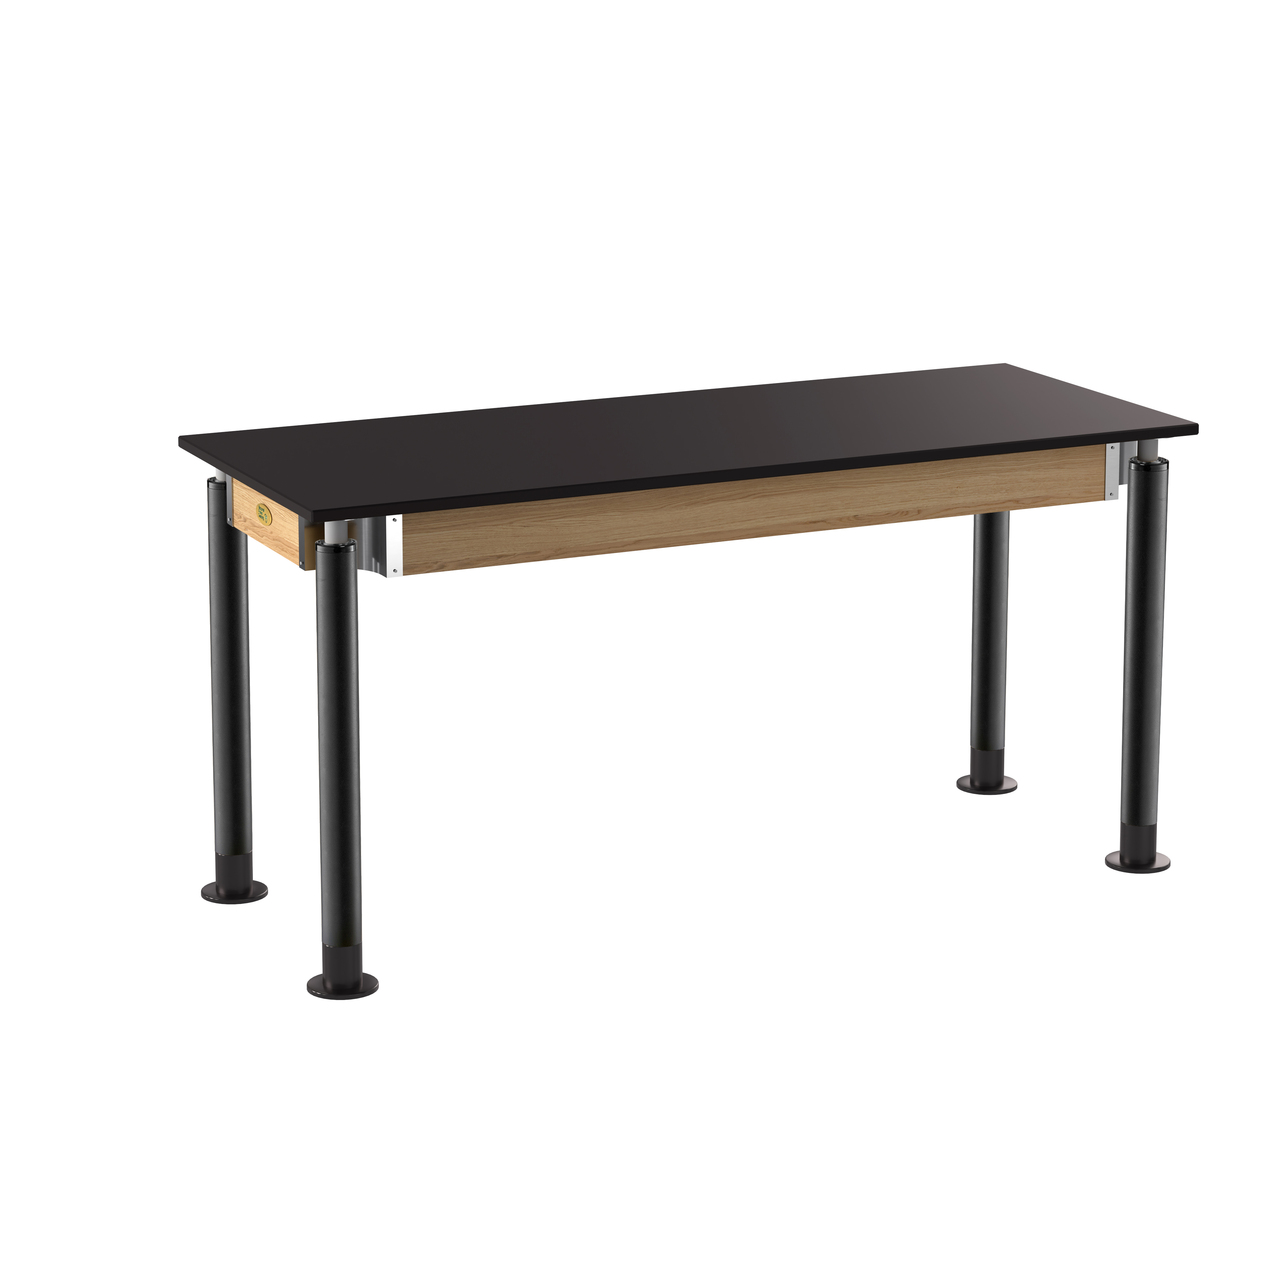 NPS Signature Science Lab Table, Black, 24"x60", Chemical Resistant Top - Black Top and Black Leg